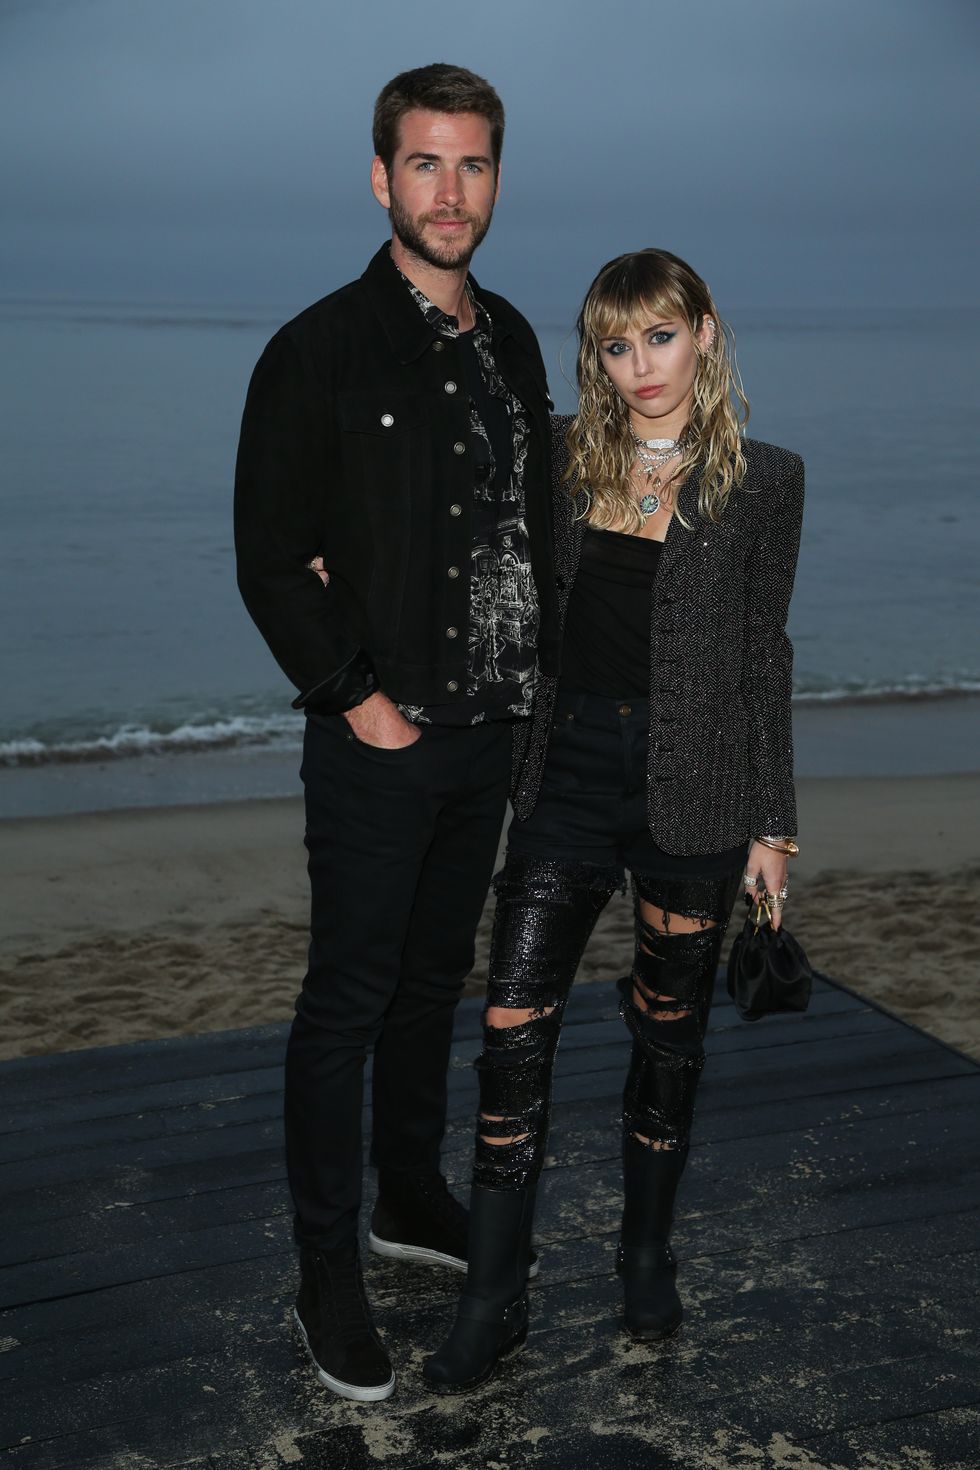 miley cyrus and liam hemsworth in june 2019﻿